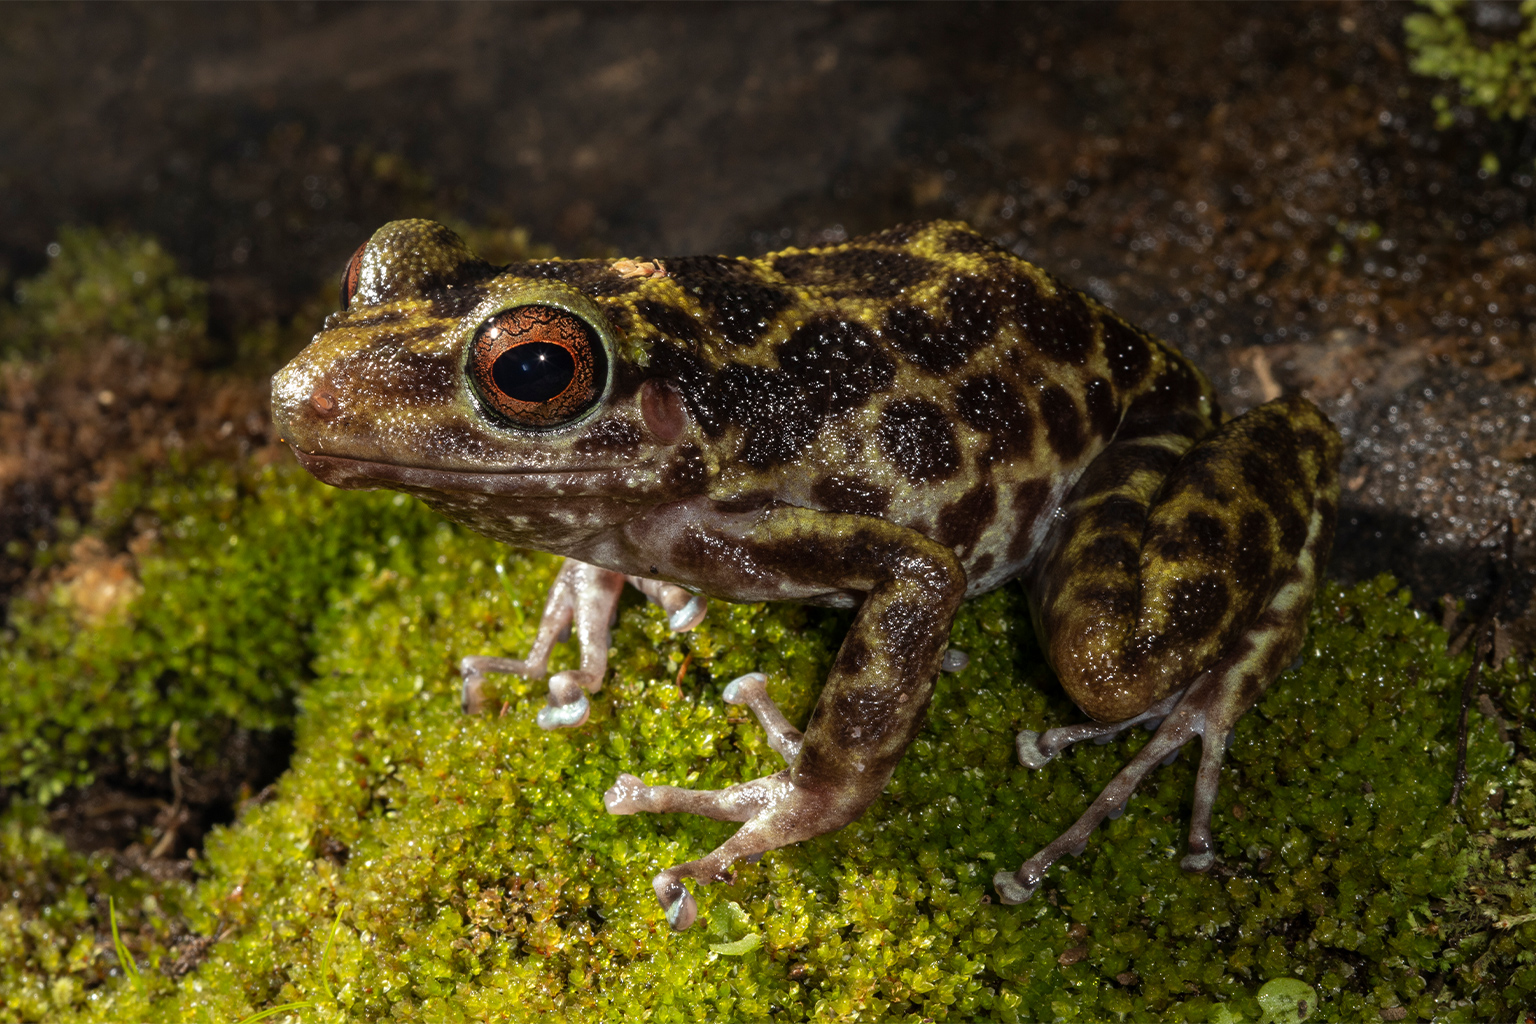 An unidentified frog species endemic to Haiti.